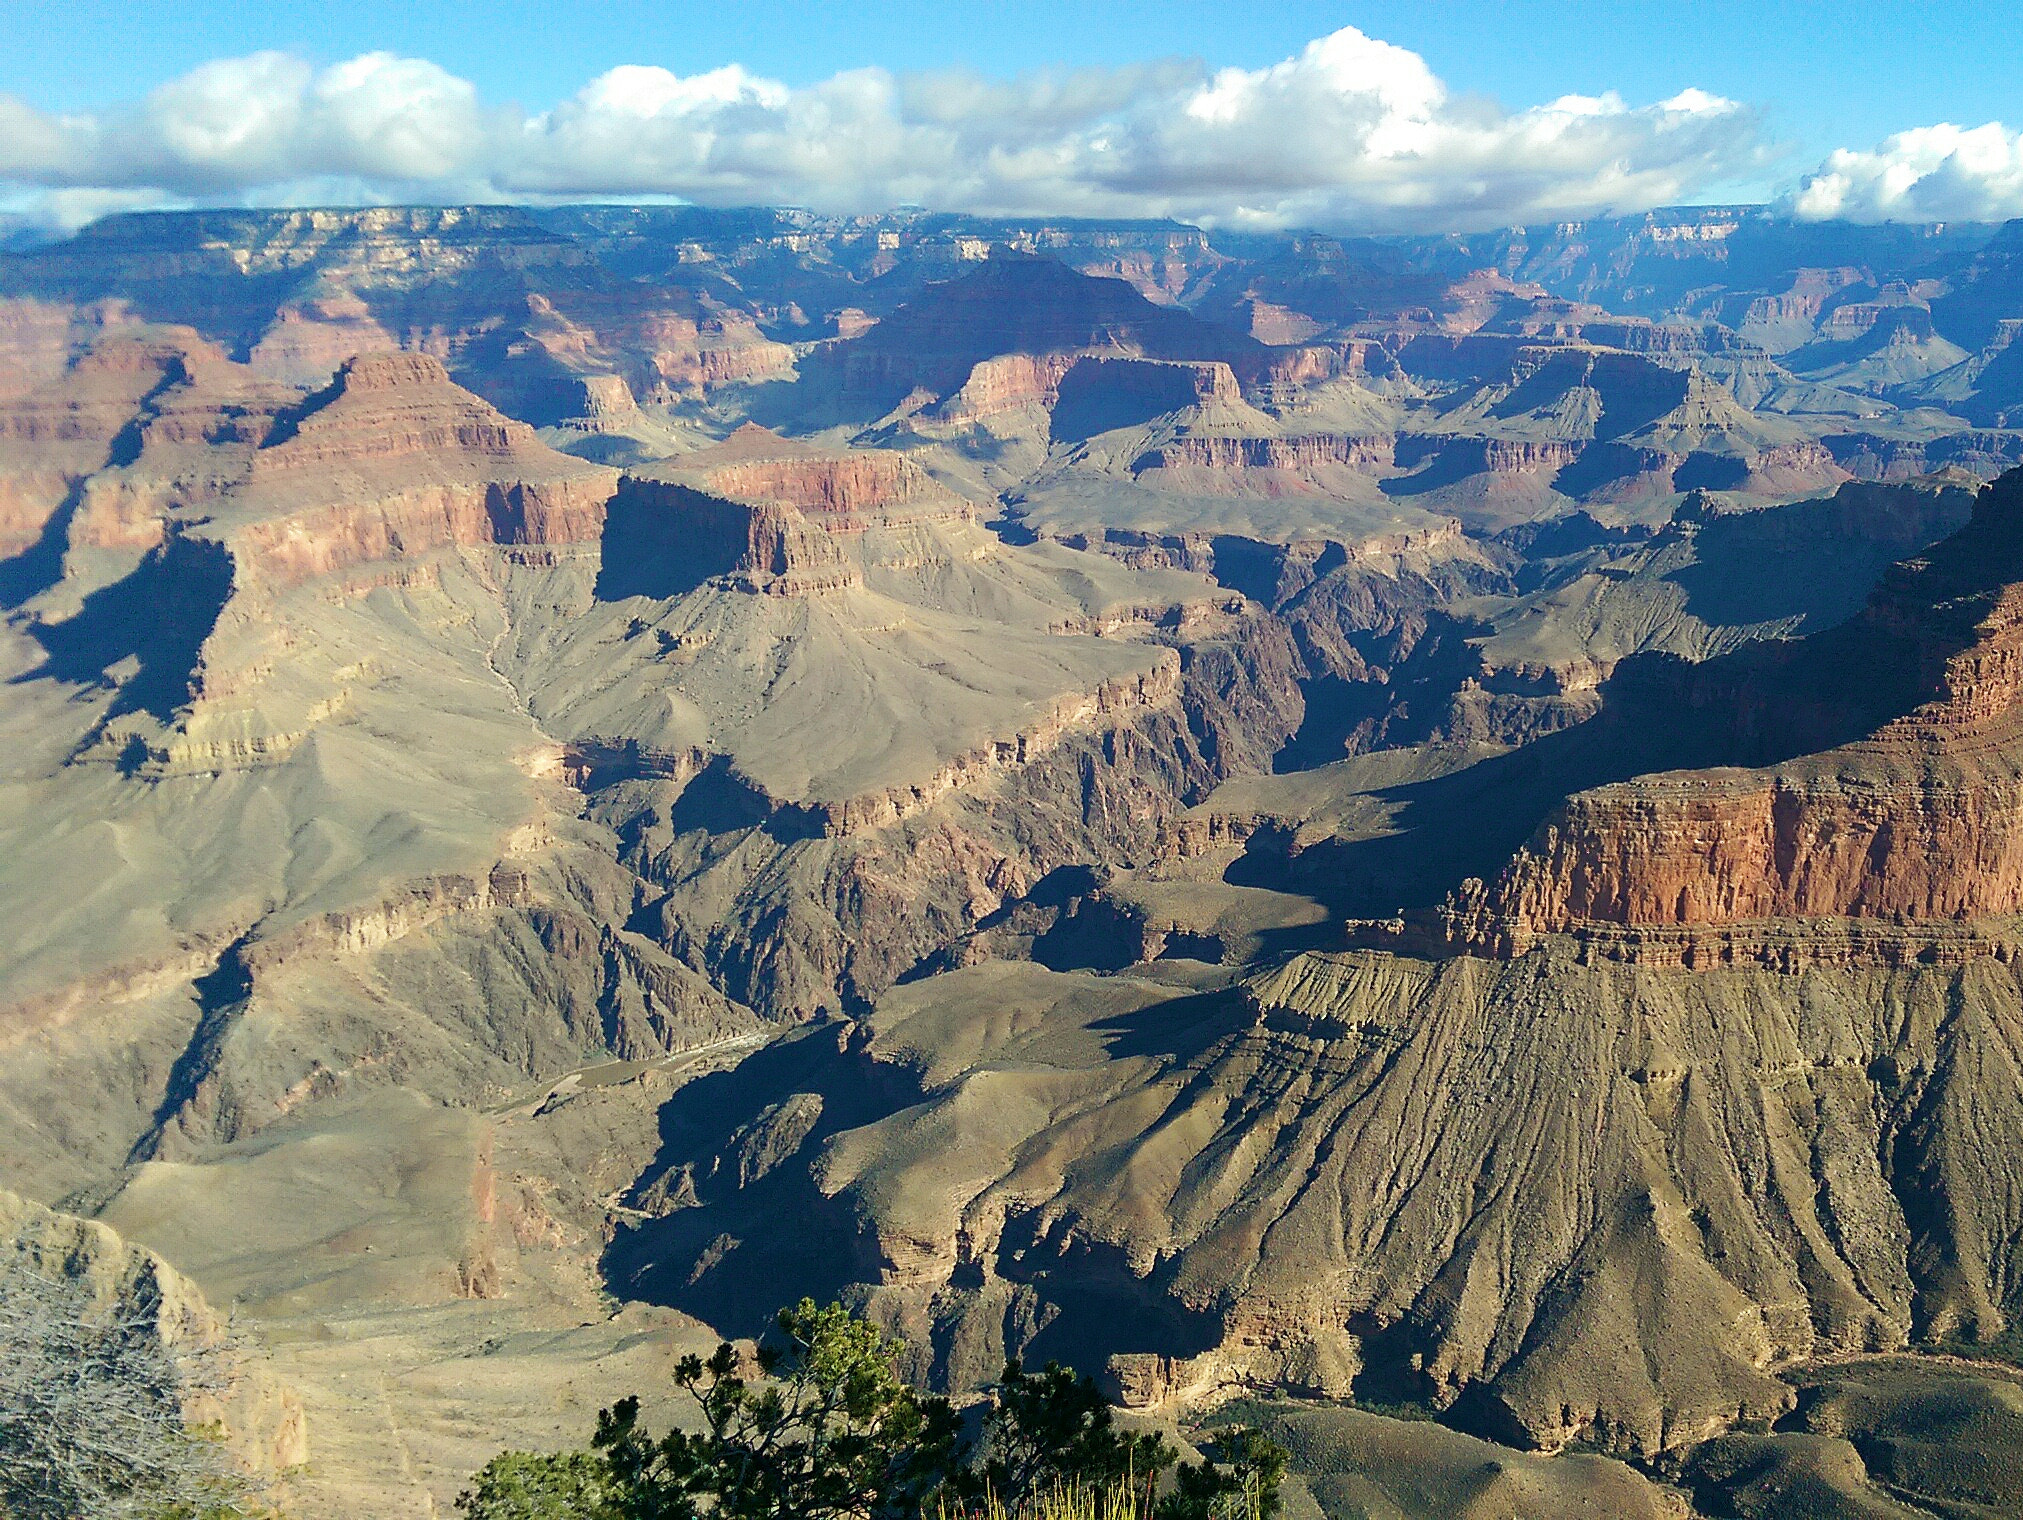 HTC ONE (M8) sample photo. Grand canyon photography